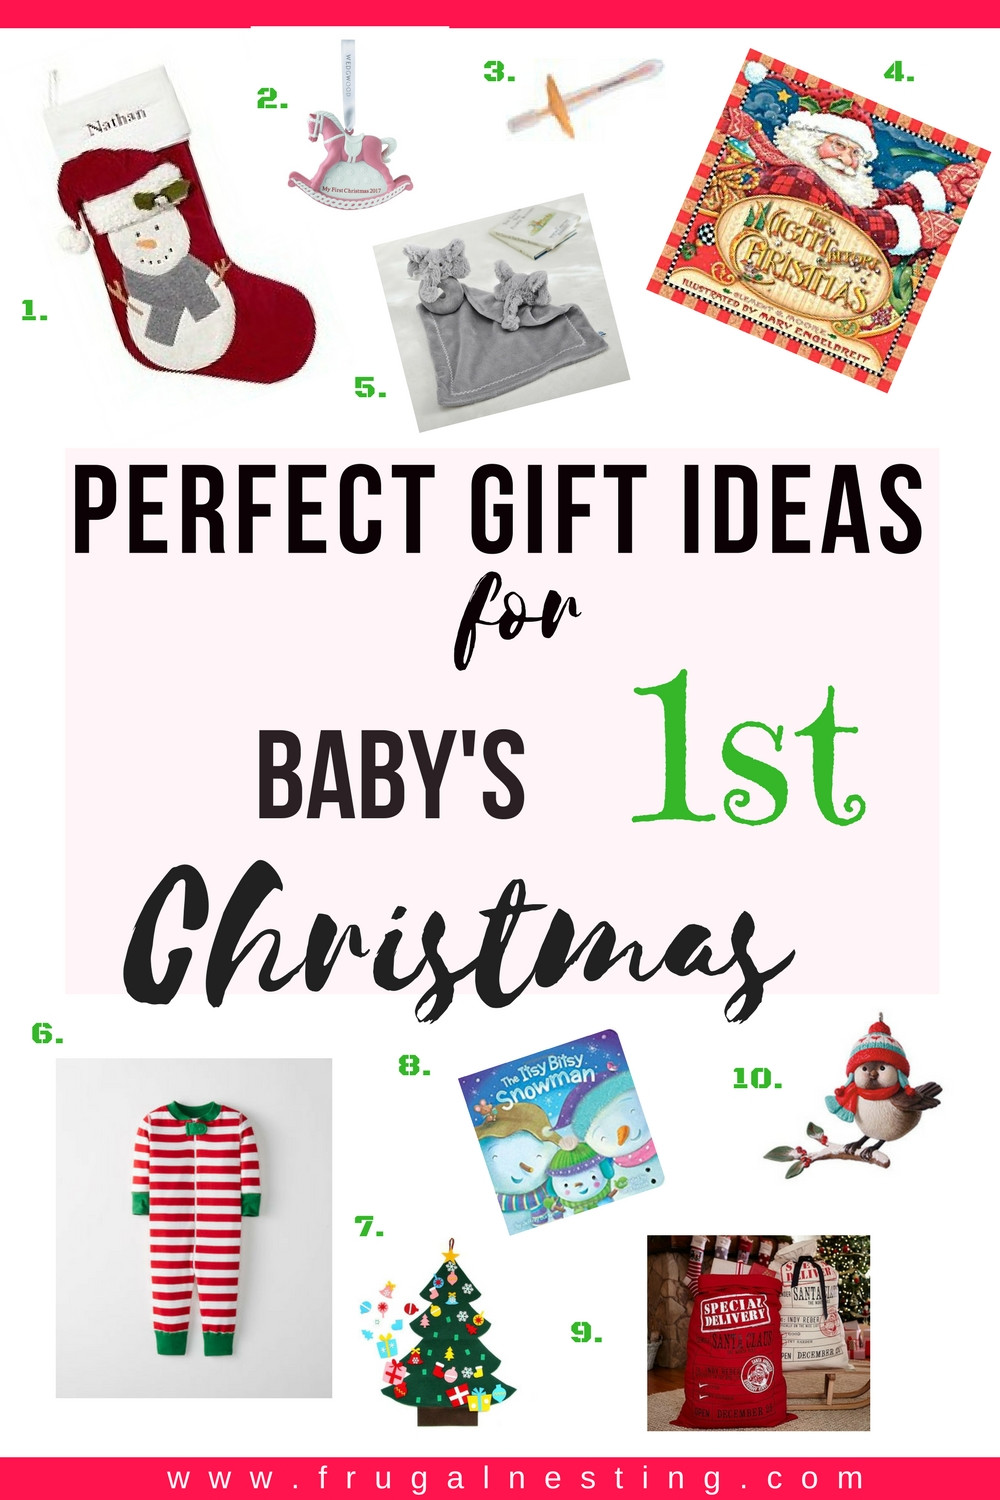 Baby'S 1St Christmas Gift Ideas
 Unique Gift Ideas for Baby s 1st Christmas